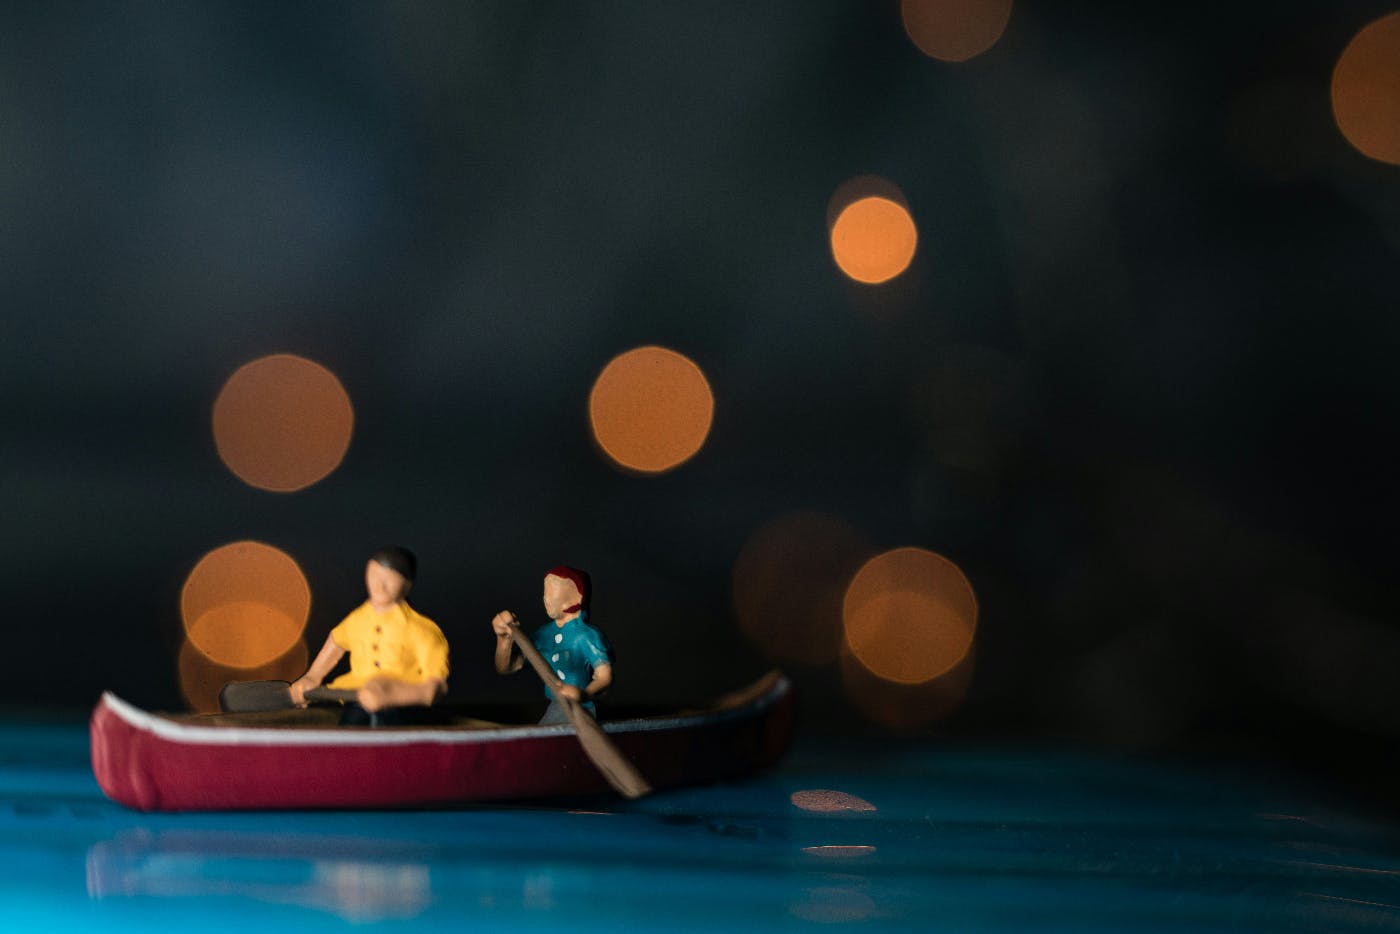 A small wood carving of two people in a red canoe